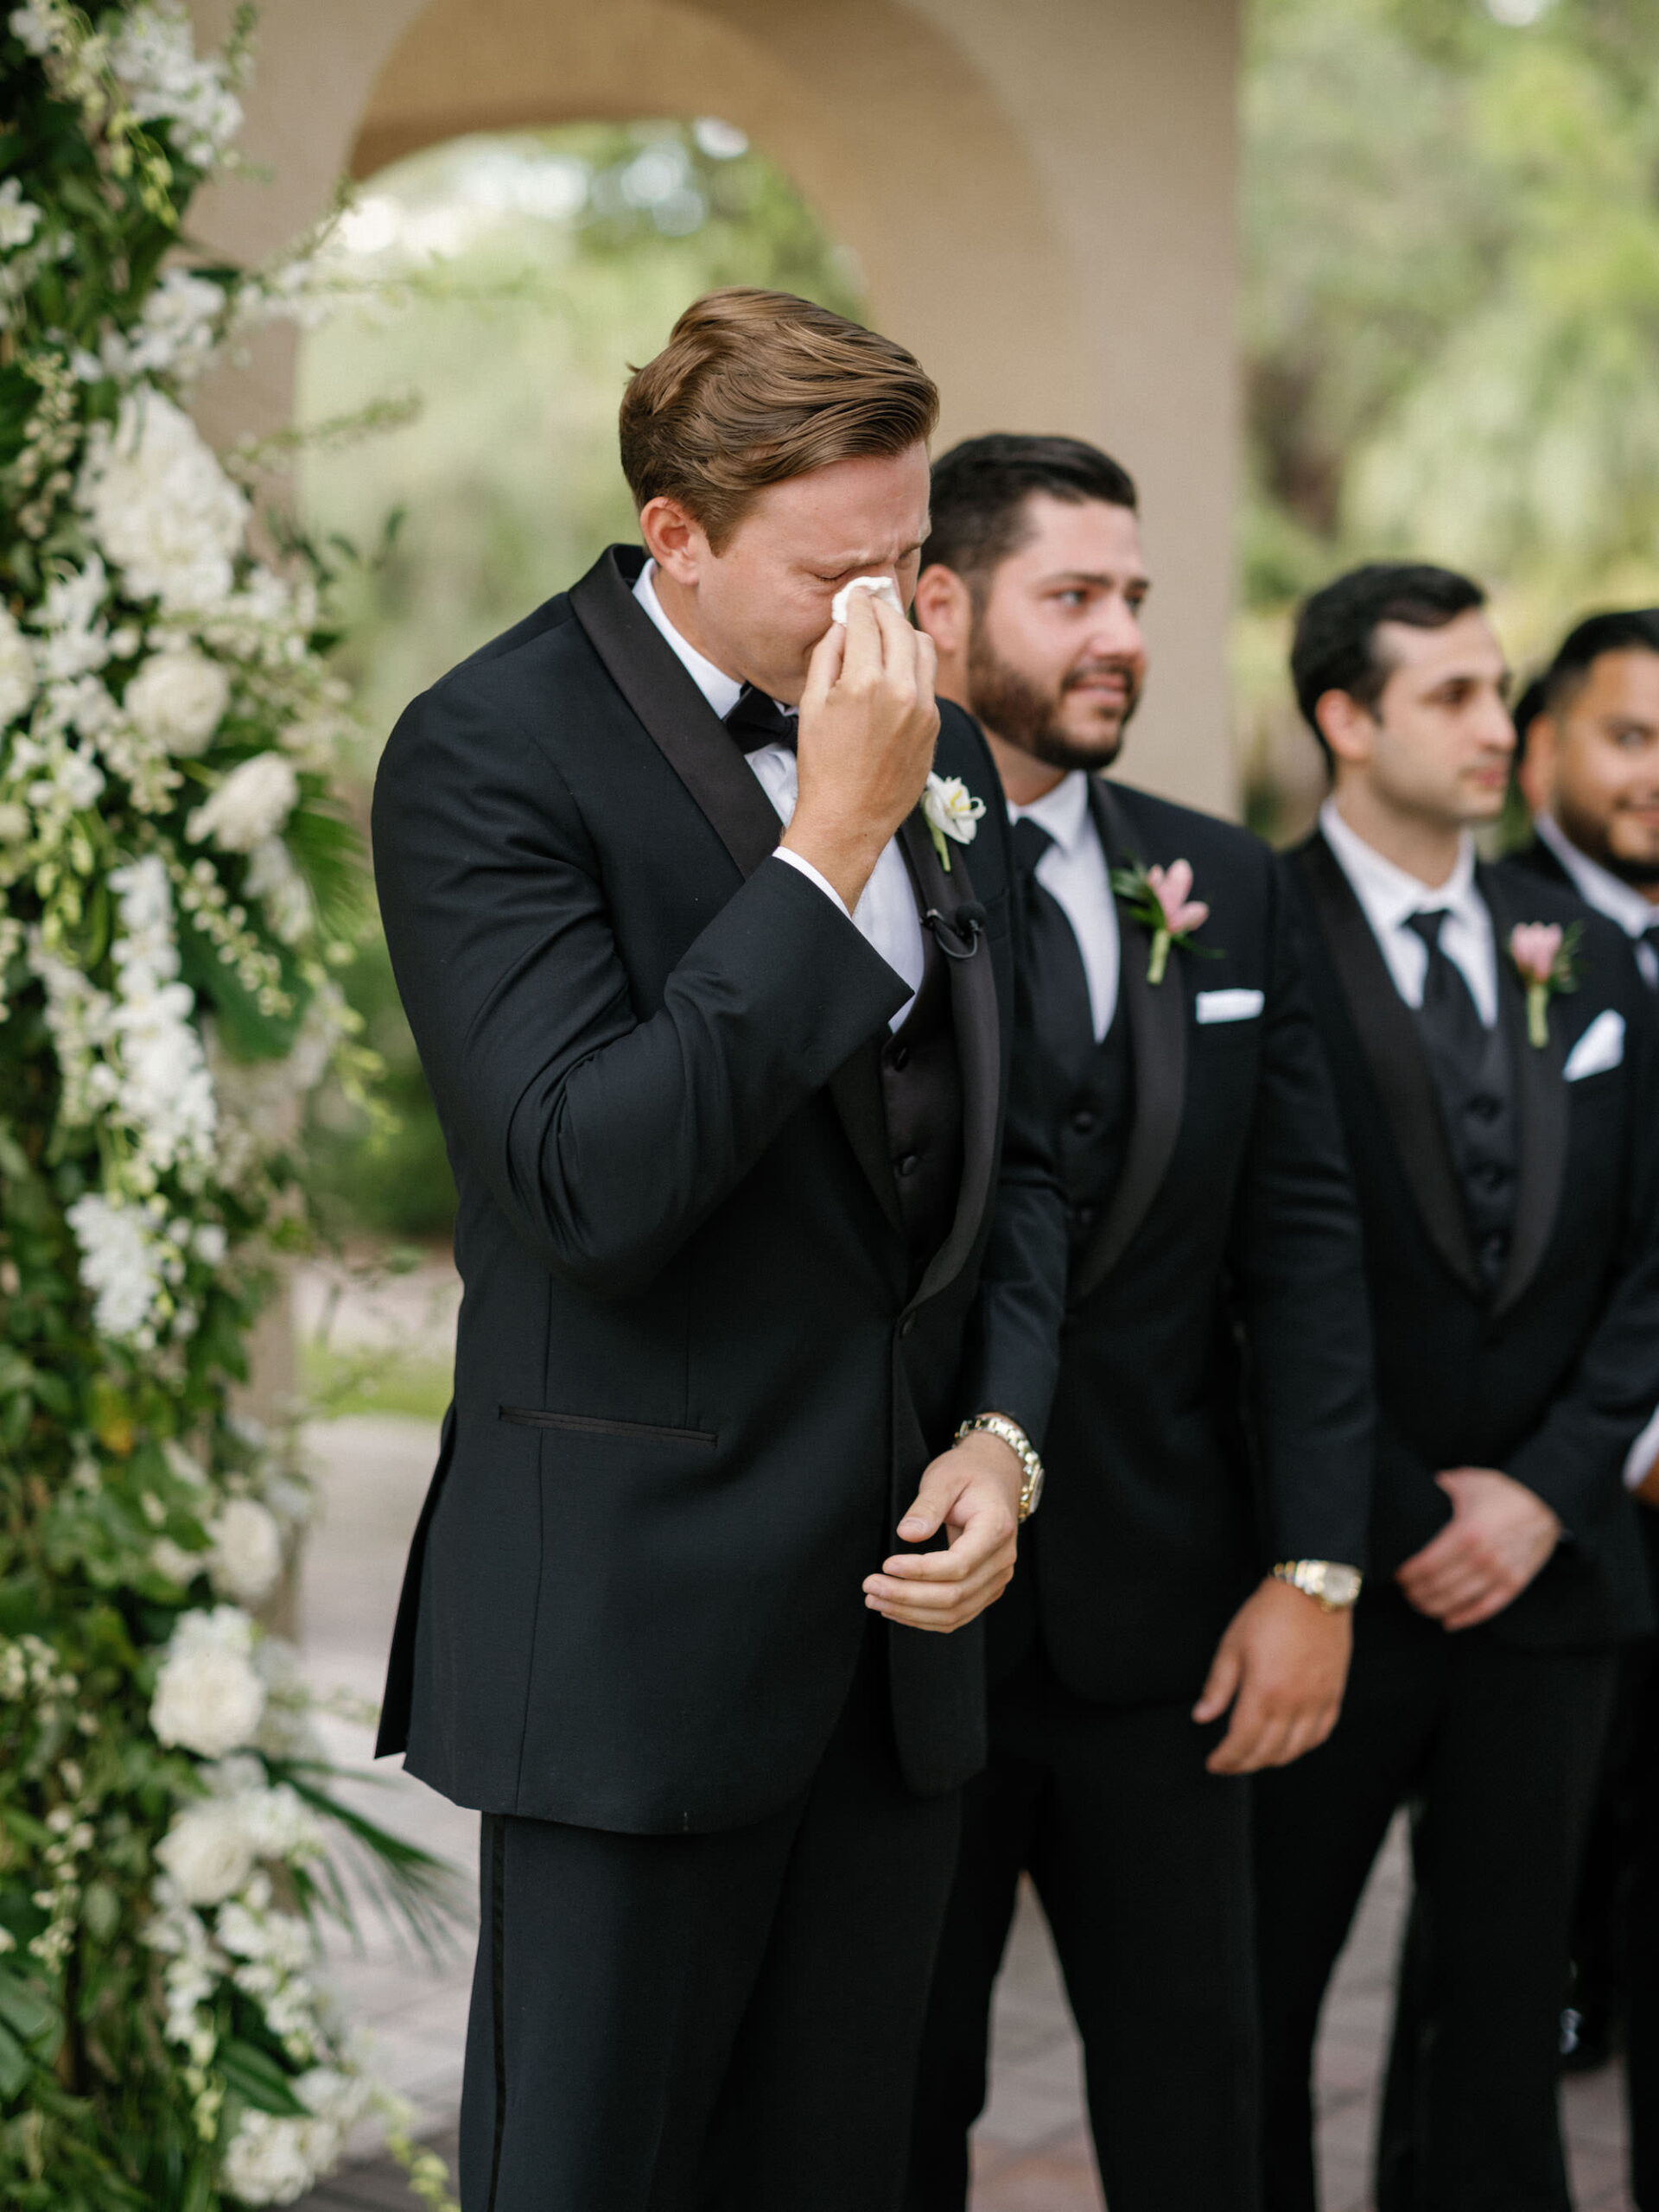 Luxurious Classic Emotional Groom During Wedding Ceremony